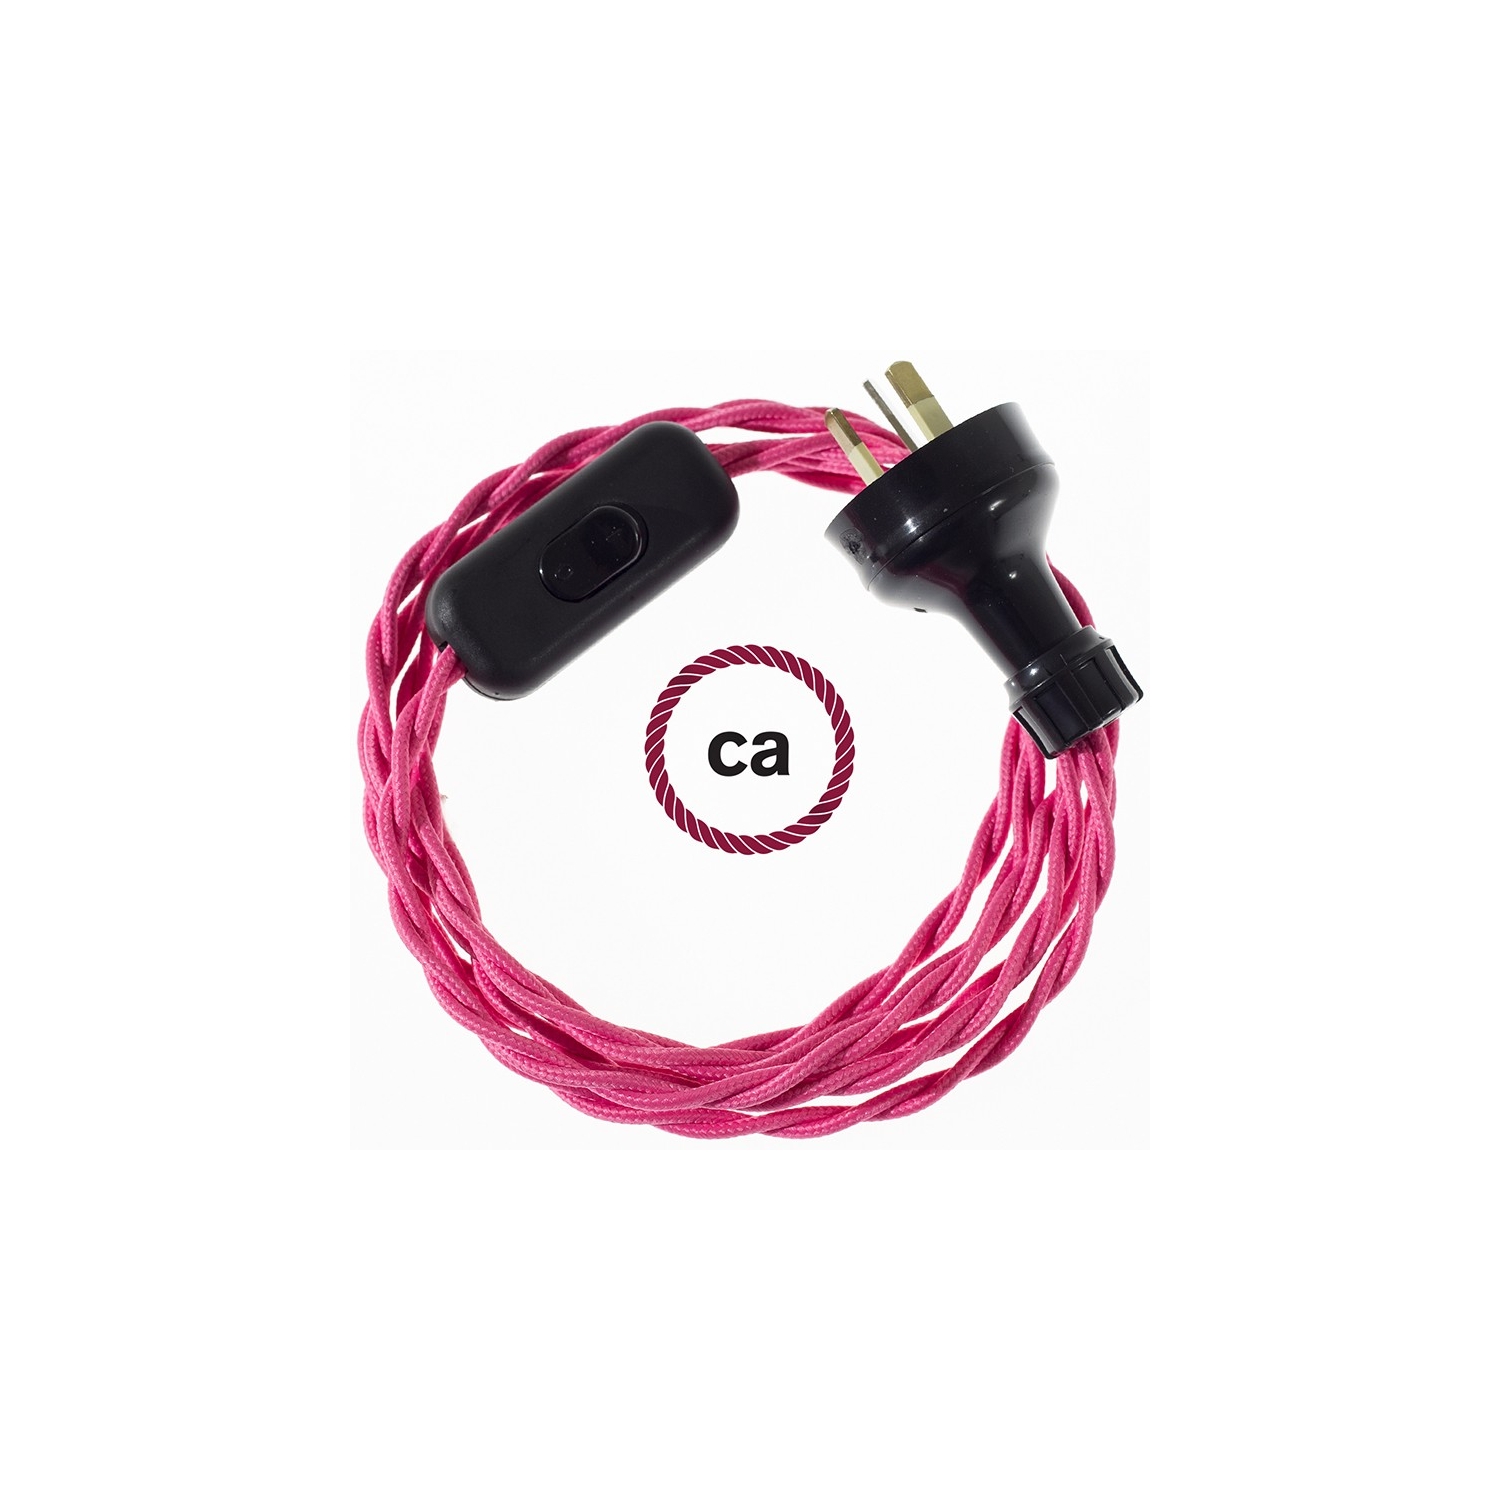 Wiring Fuchsia Rayon textile cable TM08 - 1.80 mt